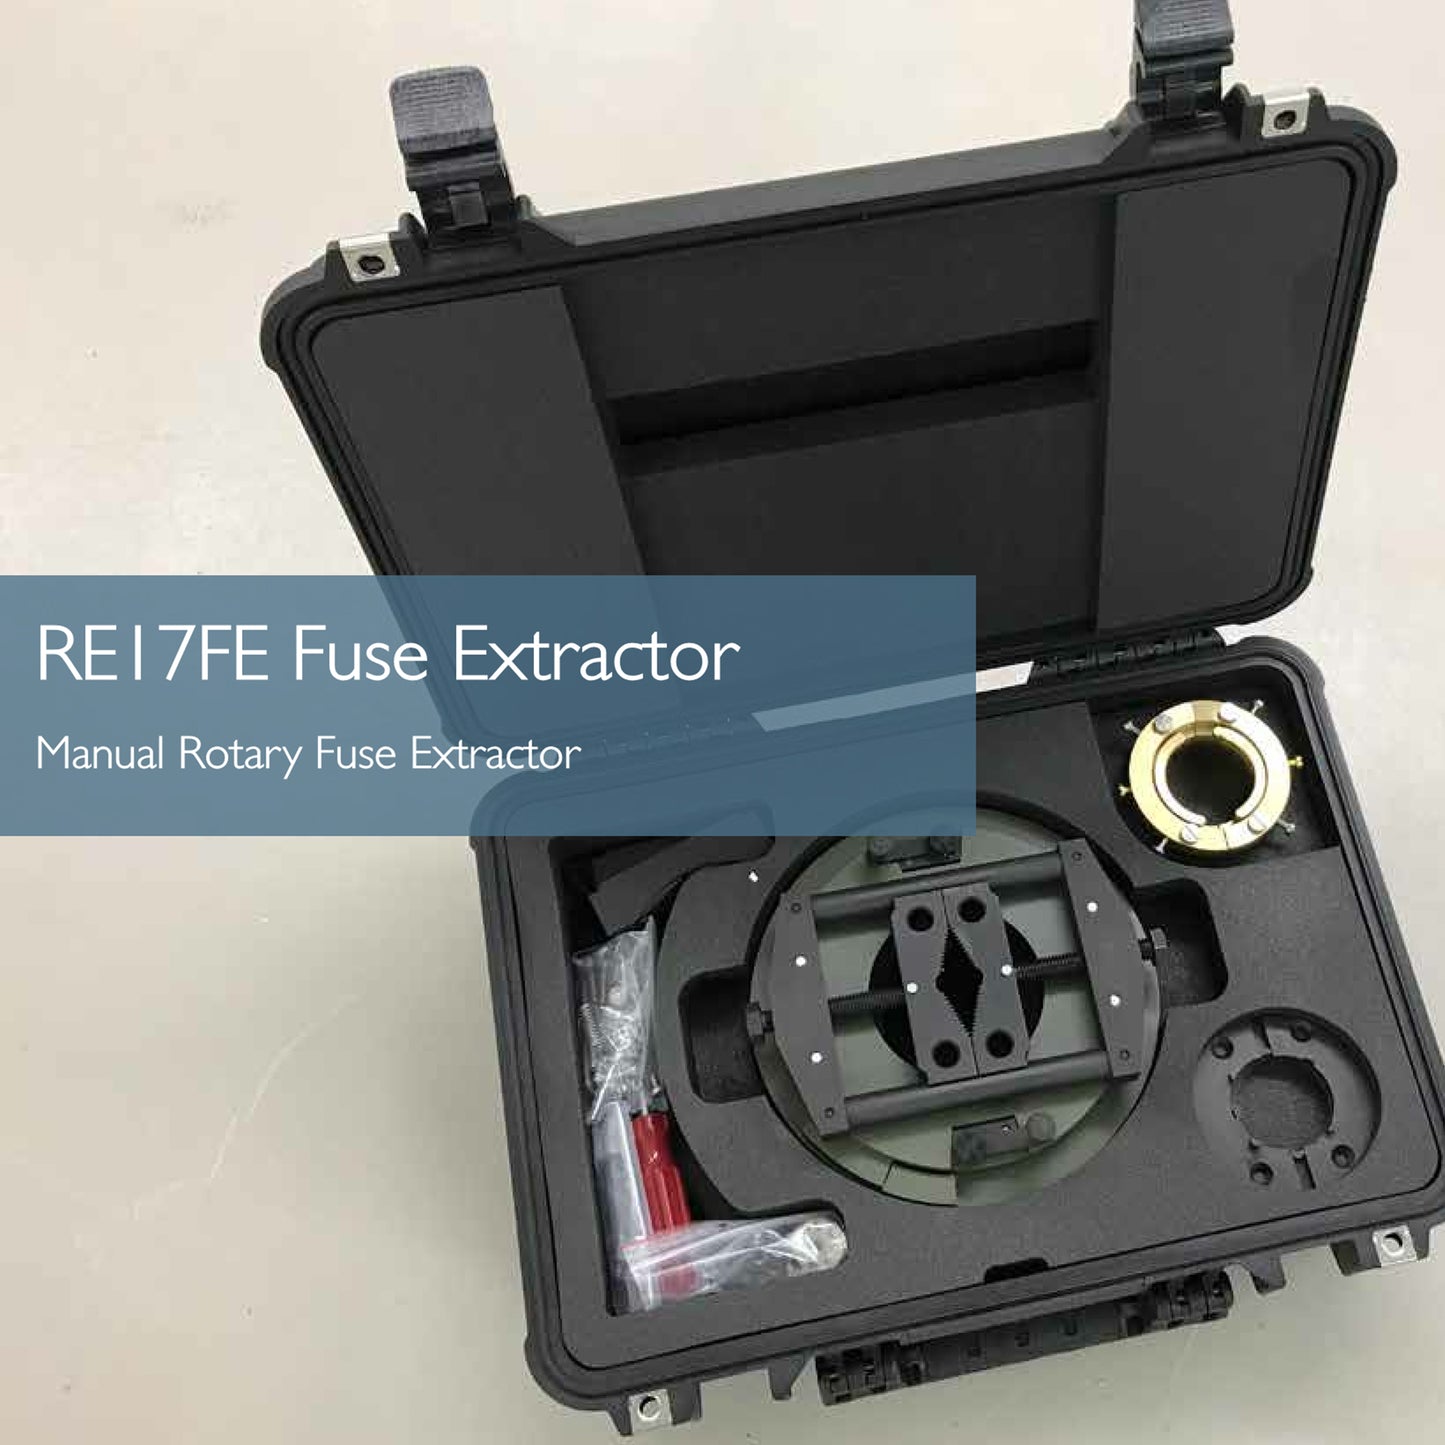 RE17FE Fuse Extractor